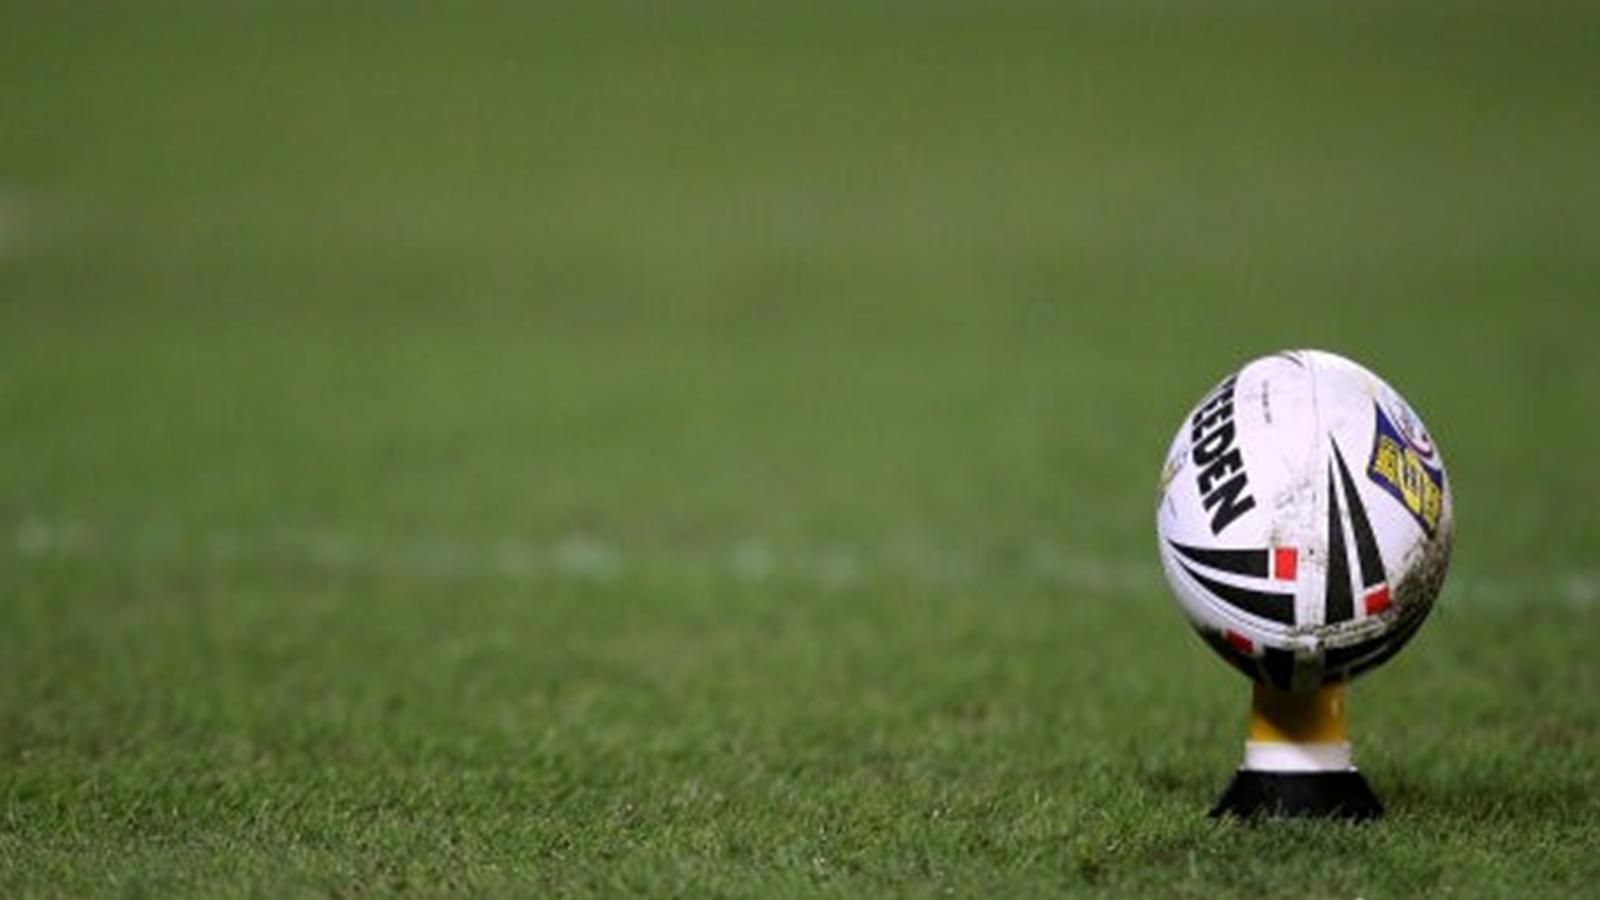 Rugby Wallpaper 02 - Rugby League Ball And Field , HD Wallpaper & Backgrounds